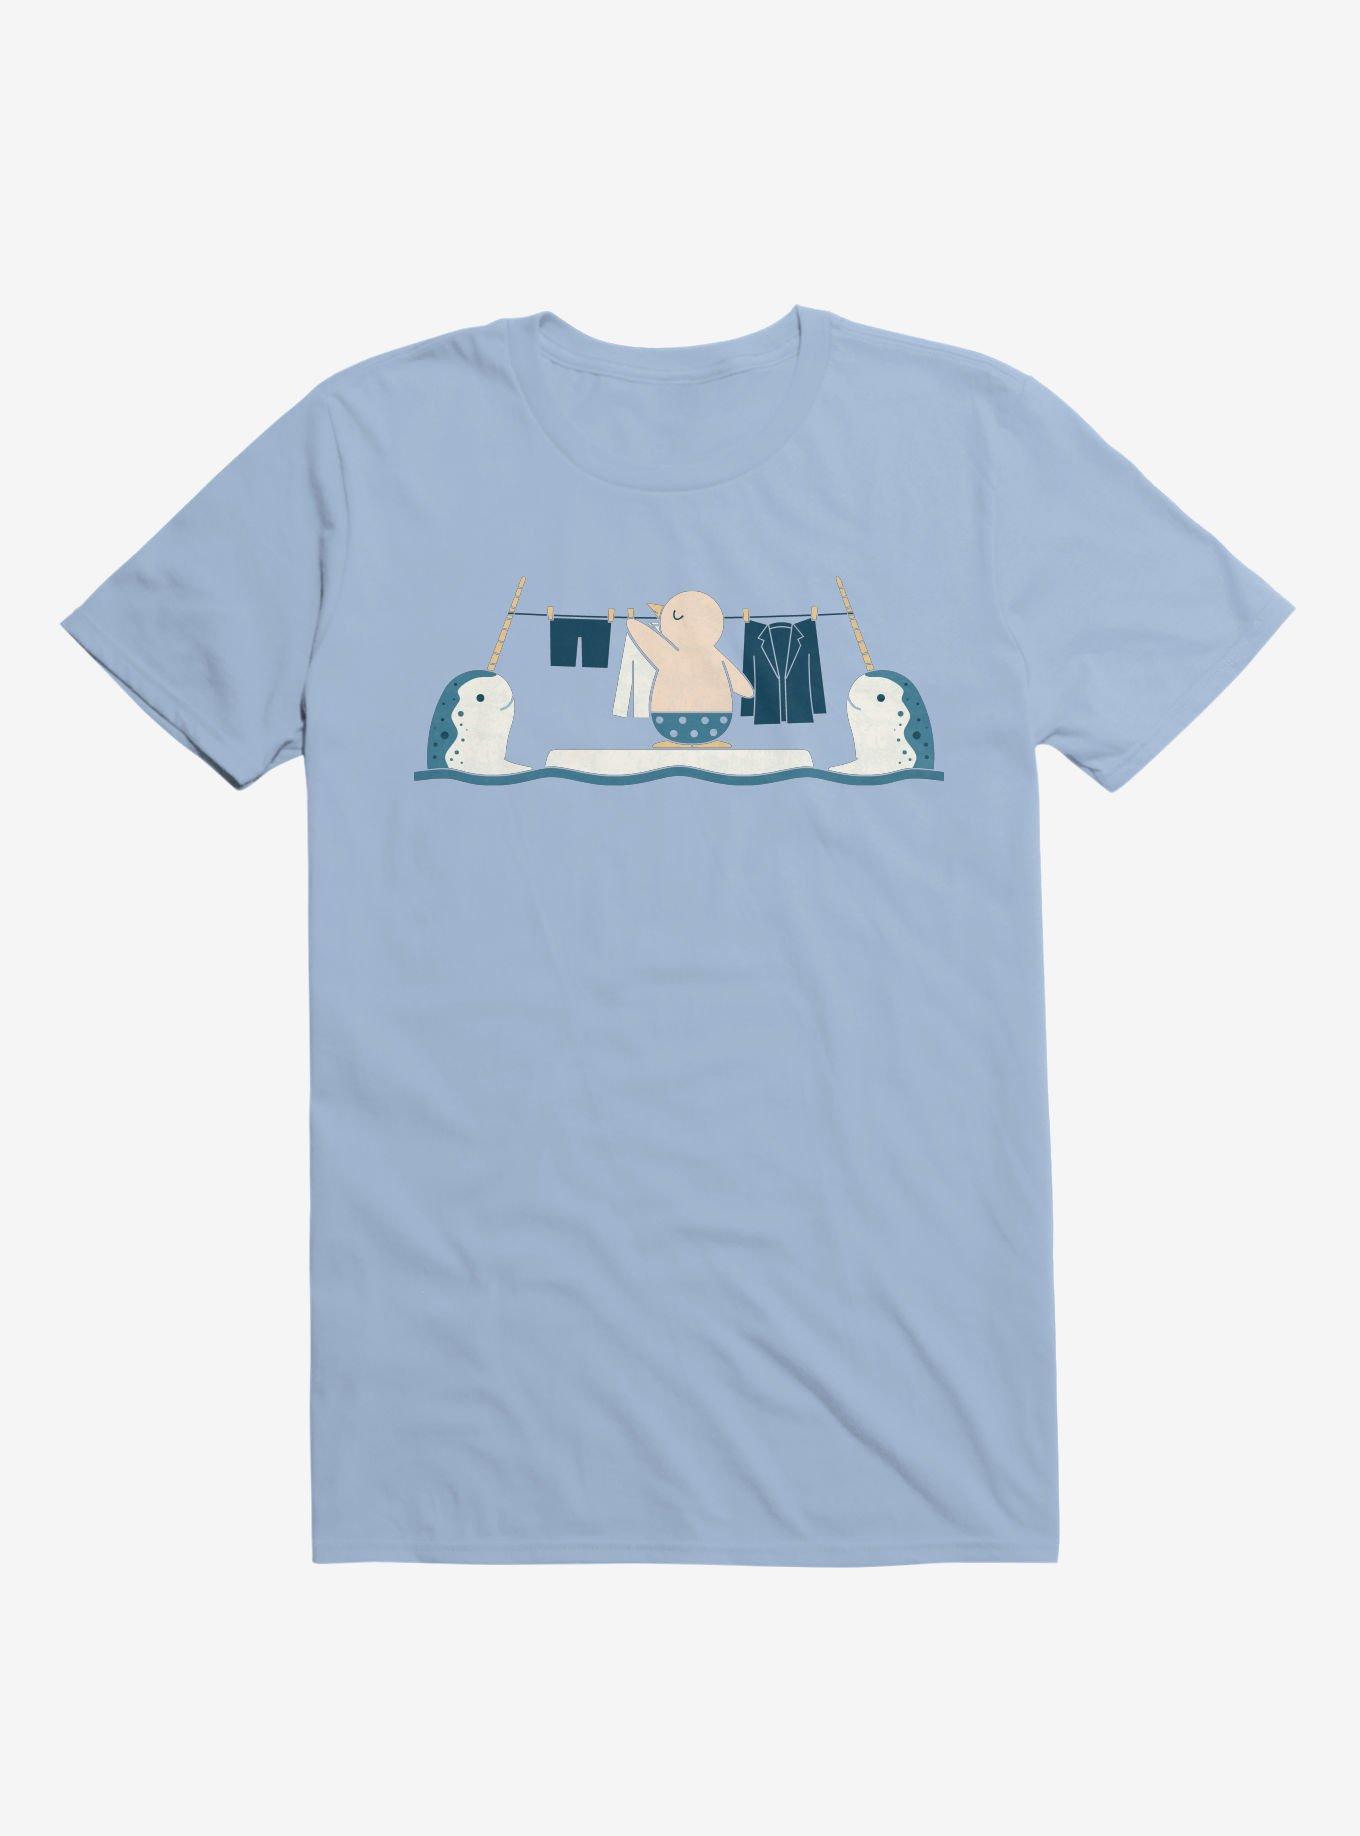 Penguin With Narwhals Laundry Day Light Blue T-Shirt, LIGHT BLUE, hi-res